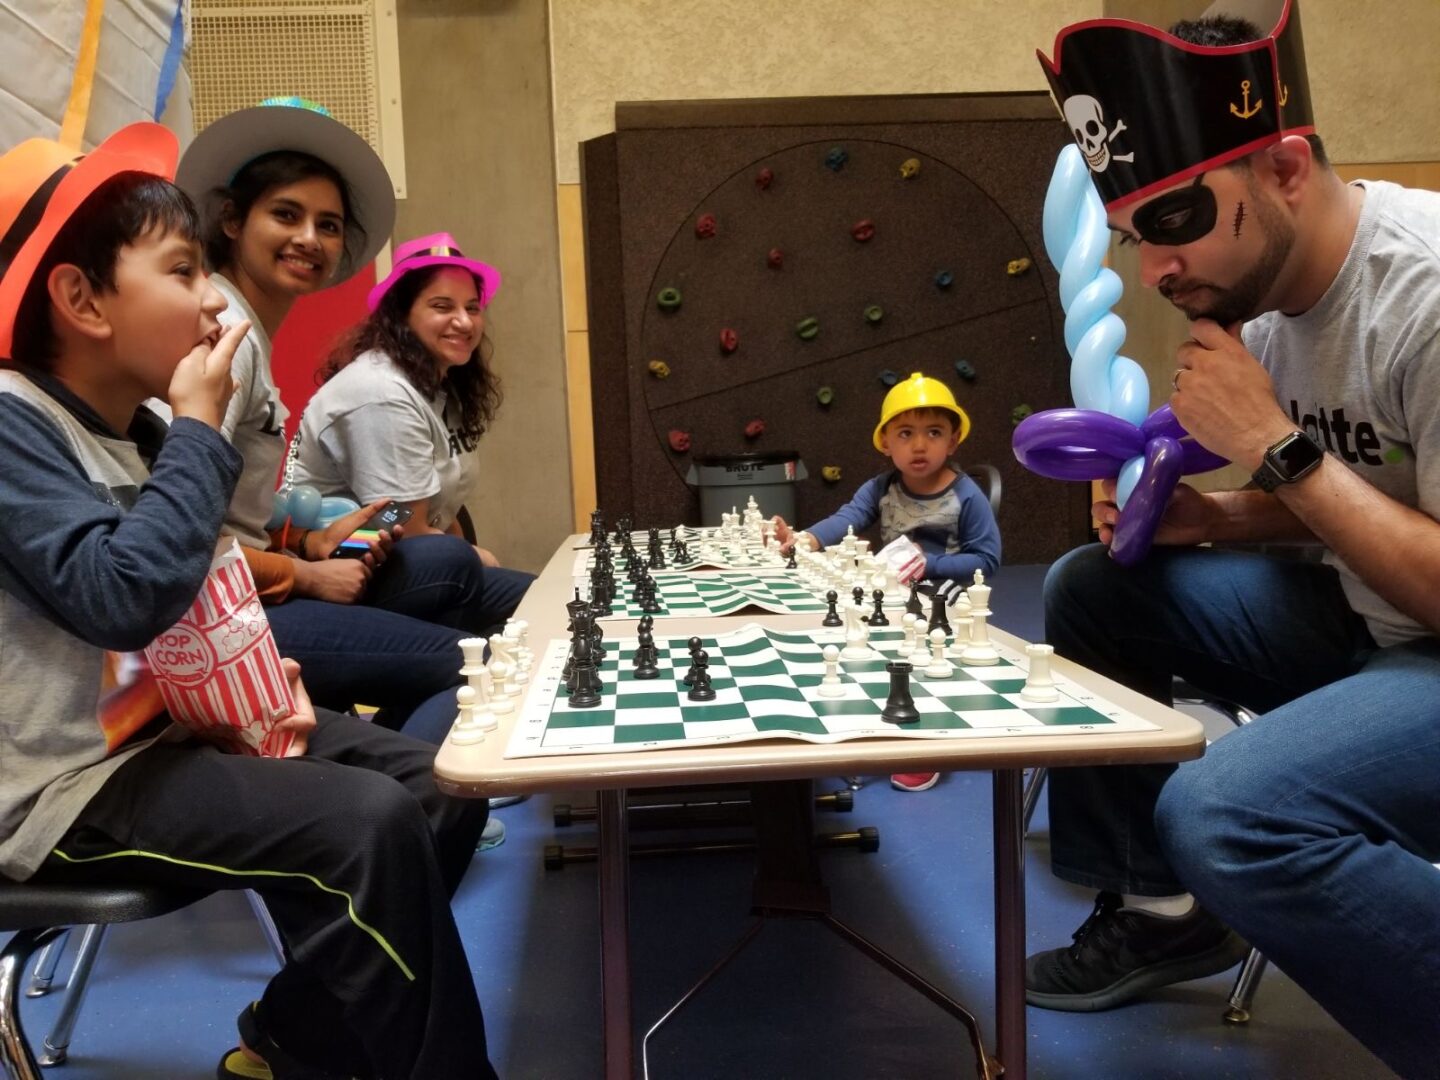 A group of people sitting around a table with chess pieces.